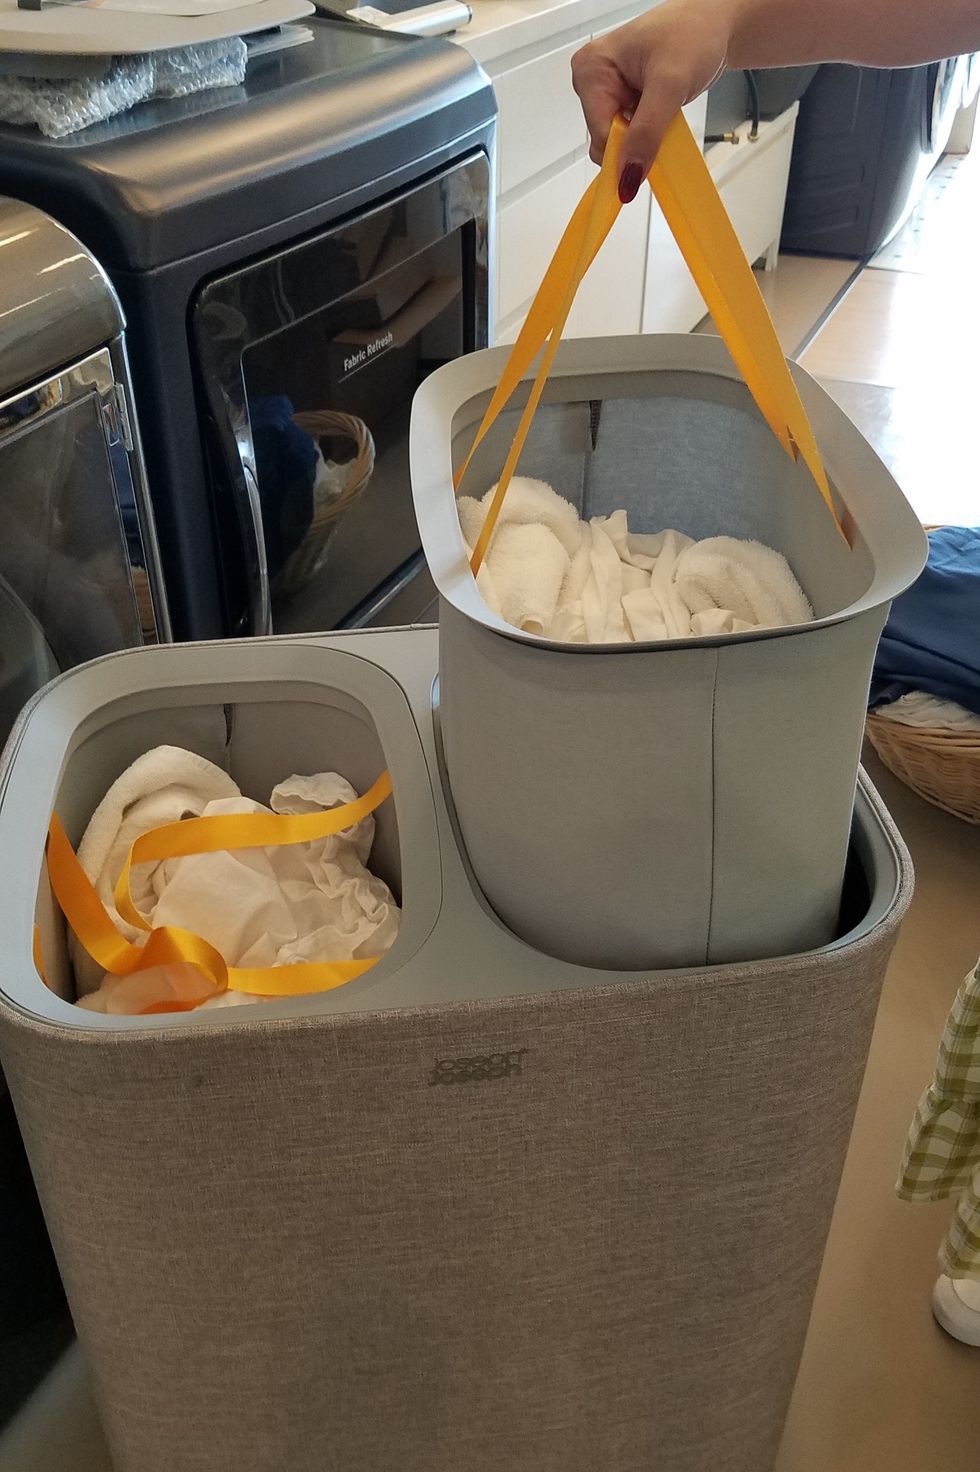 a hand lifting one bag of laundry from a gray joseph joseph laundry hamper in the good housekeeping institute cleaning lab